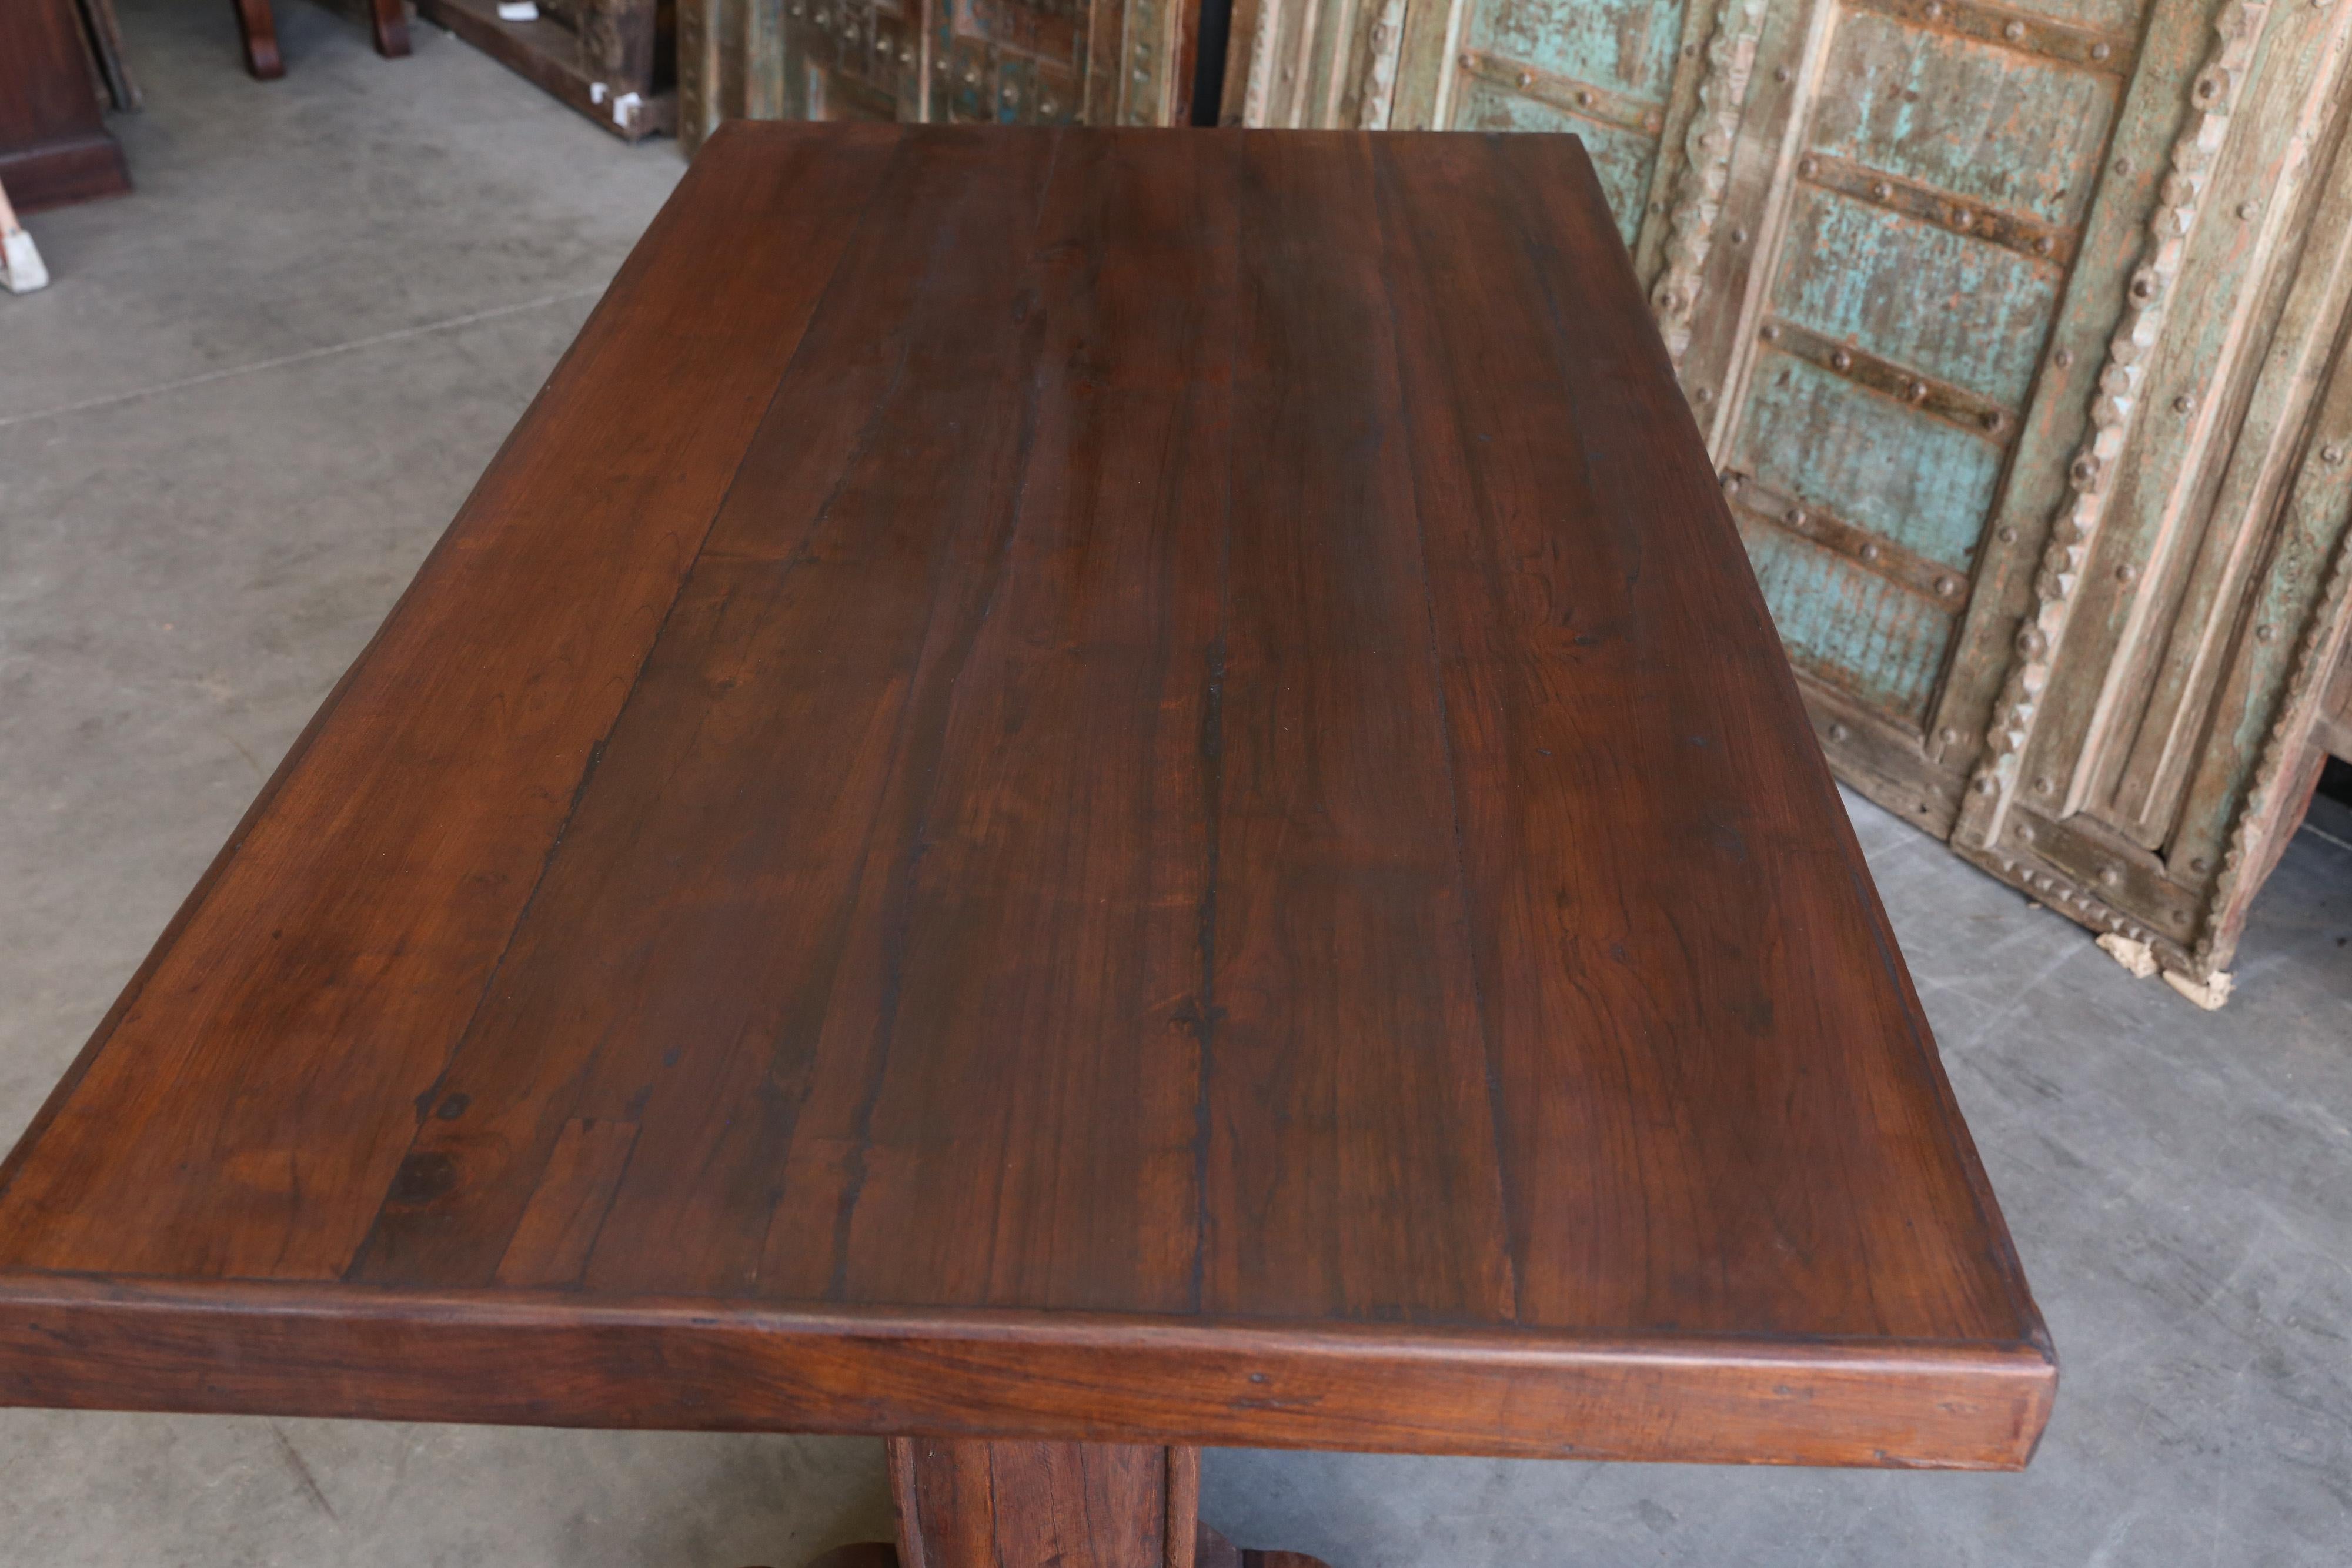 Early 20th Century Solid Teak Wood Pedestal Dining Table from a Settler's Home 1